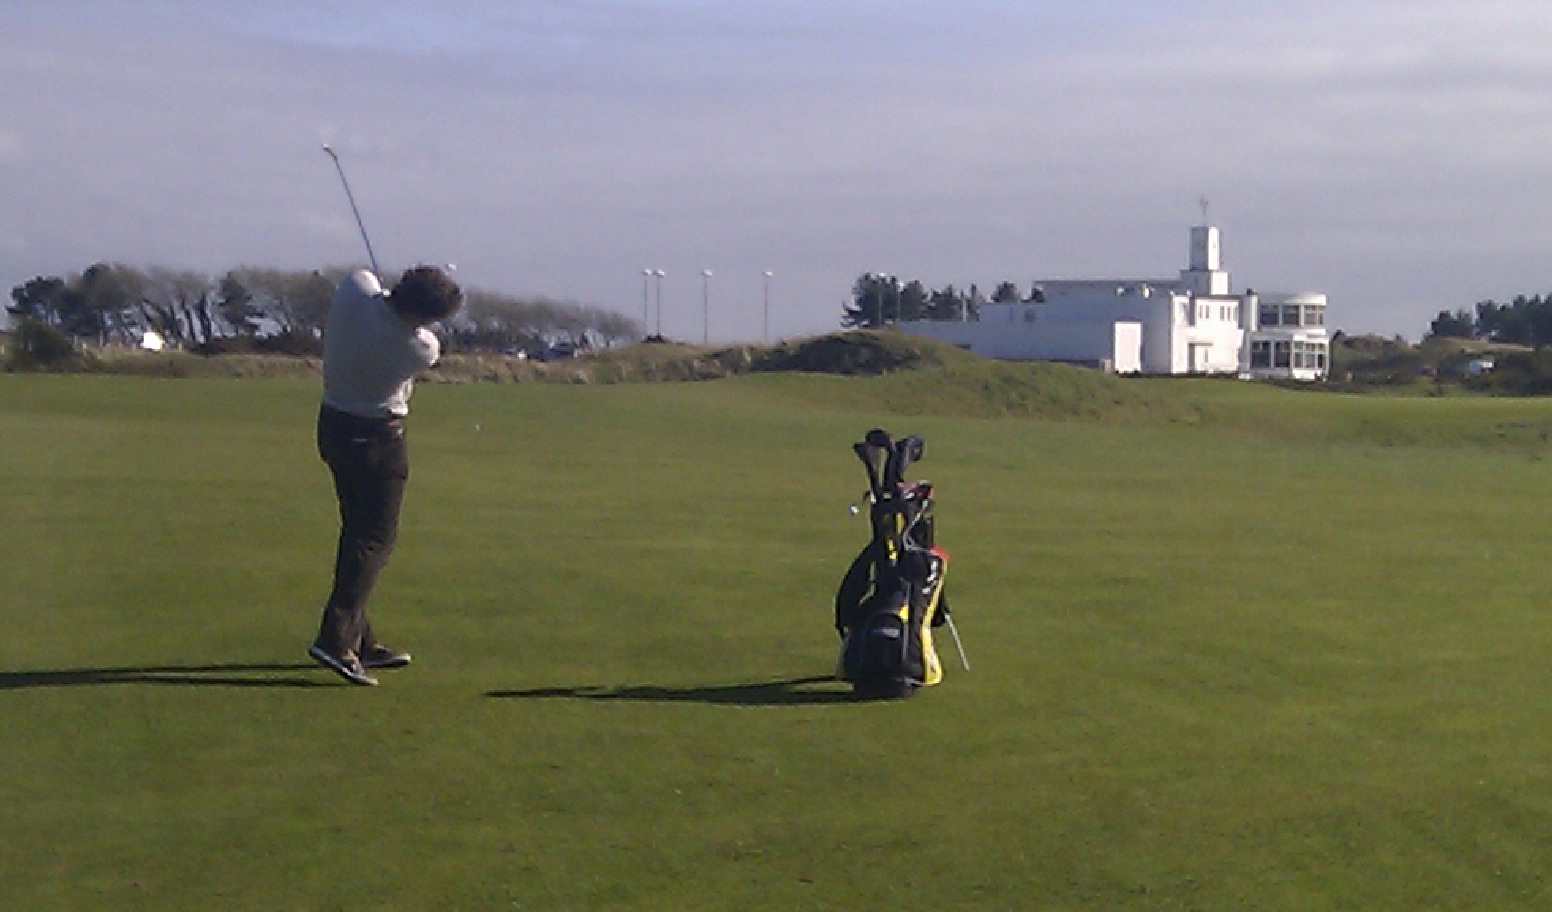 Adam makes his approach at the 9th - one of the best holes in British golf